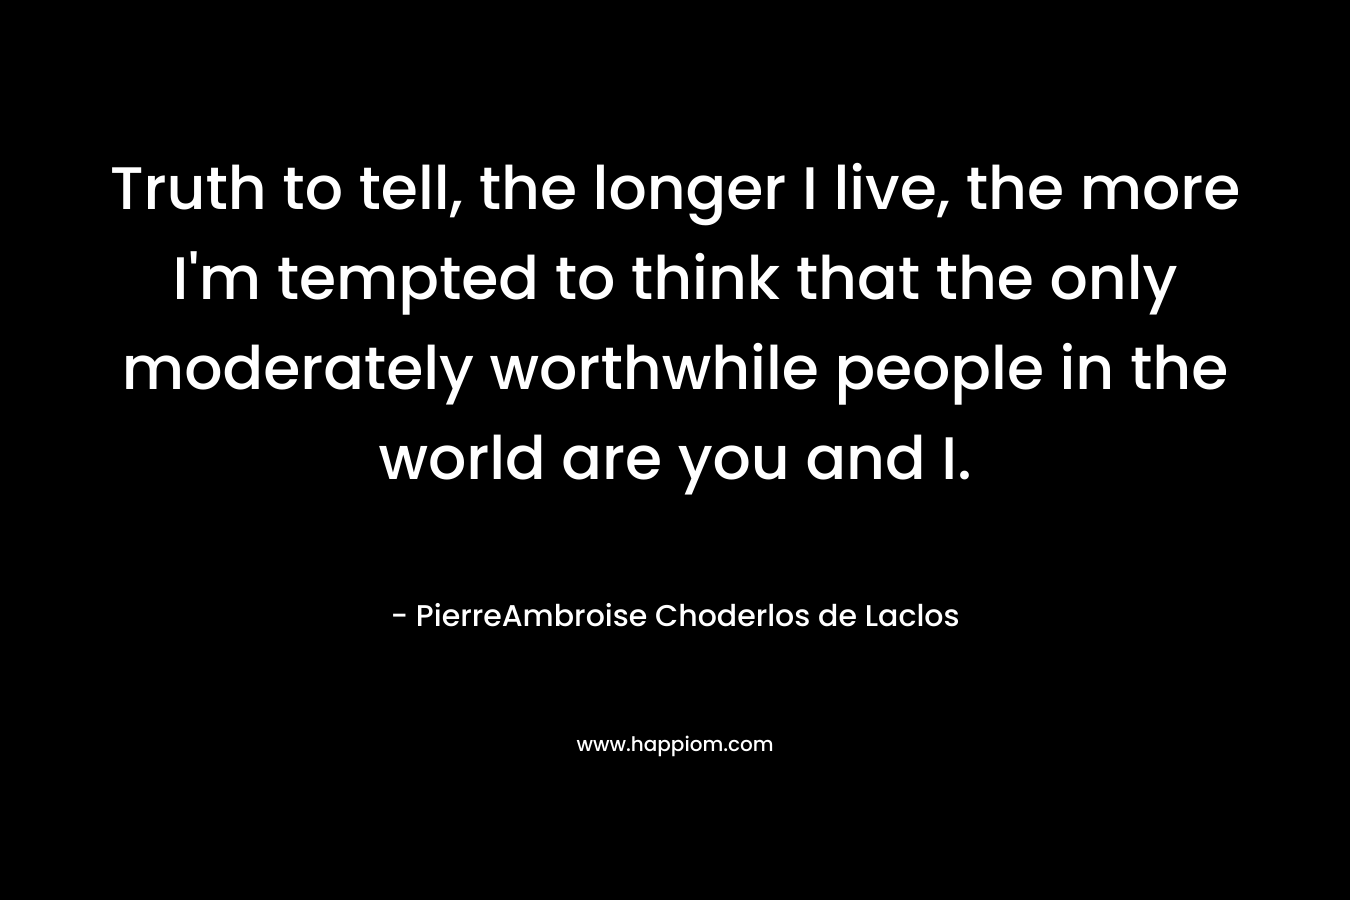 Truth to tell, the longer I live, the more I’m tempted to think that the only moderately worthwhile people in the world are you and I. – PierreAmbroise Choderlos de Laclos